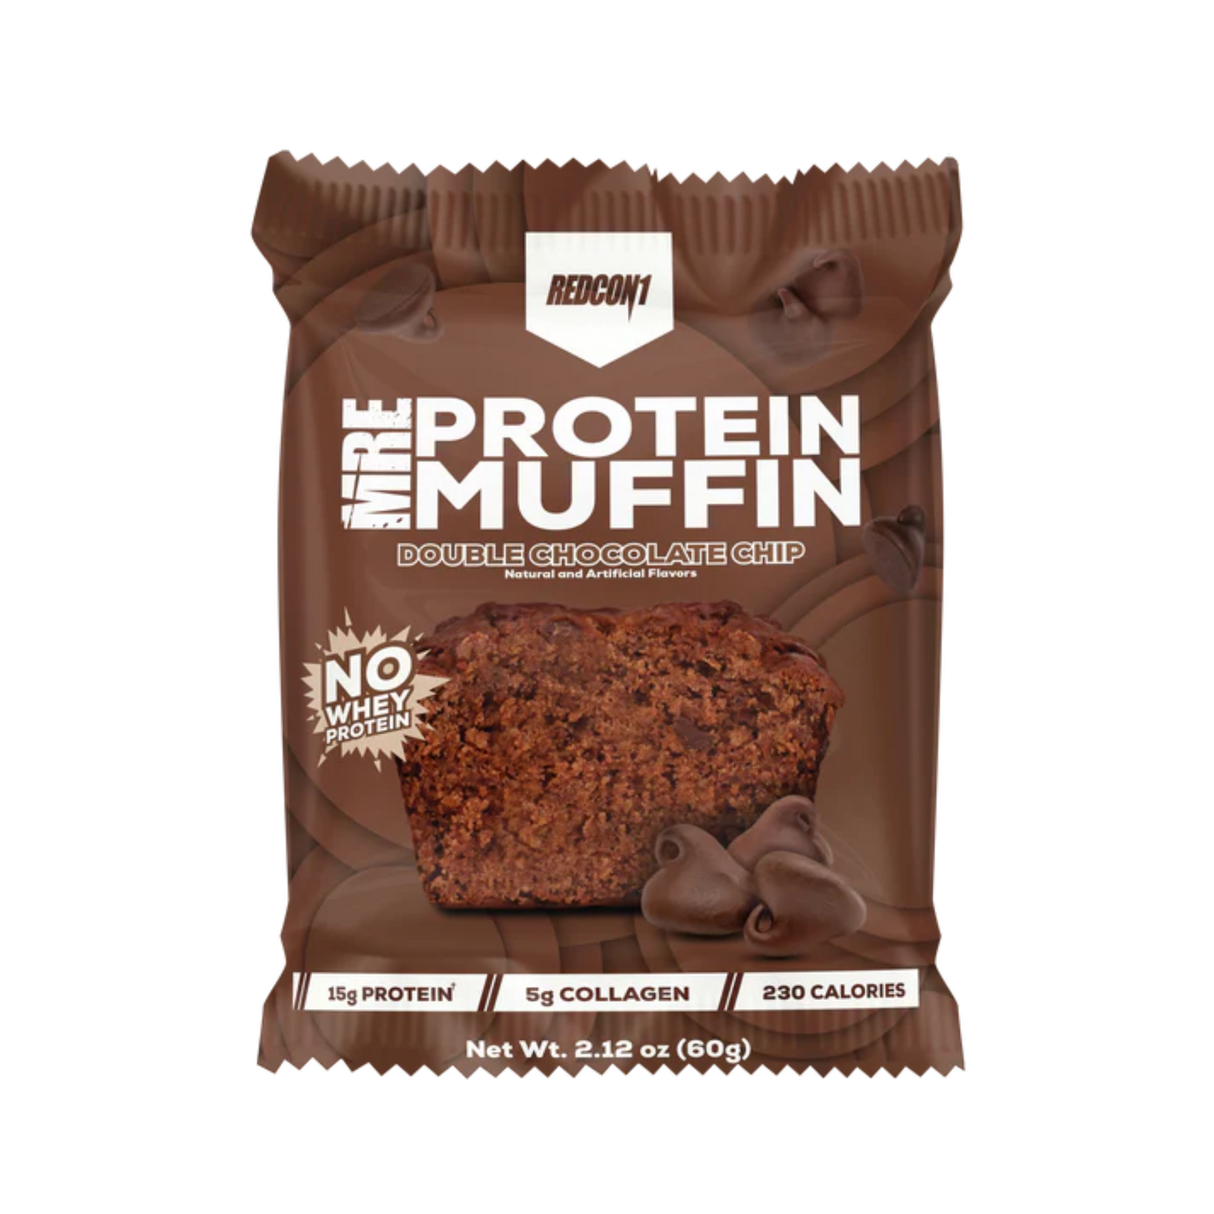 PROTEIN MUFFIN - Kingpin Supplements 